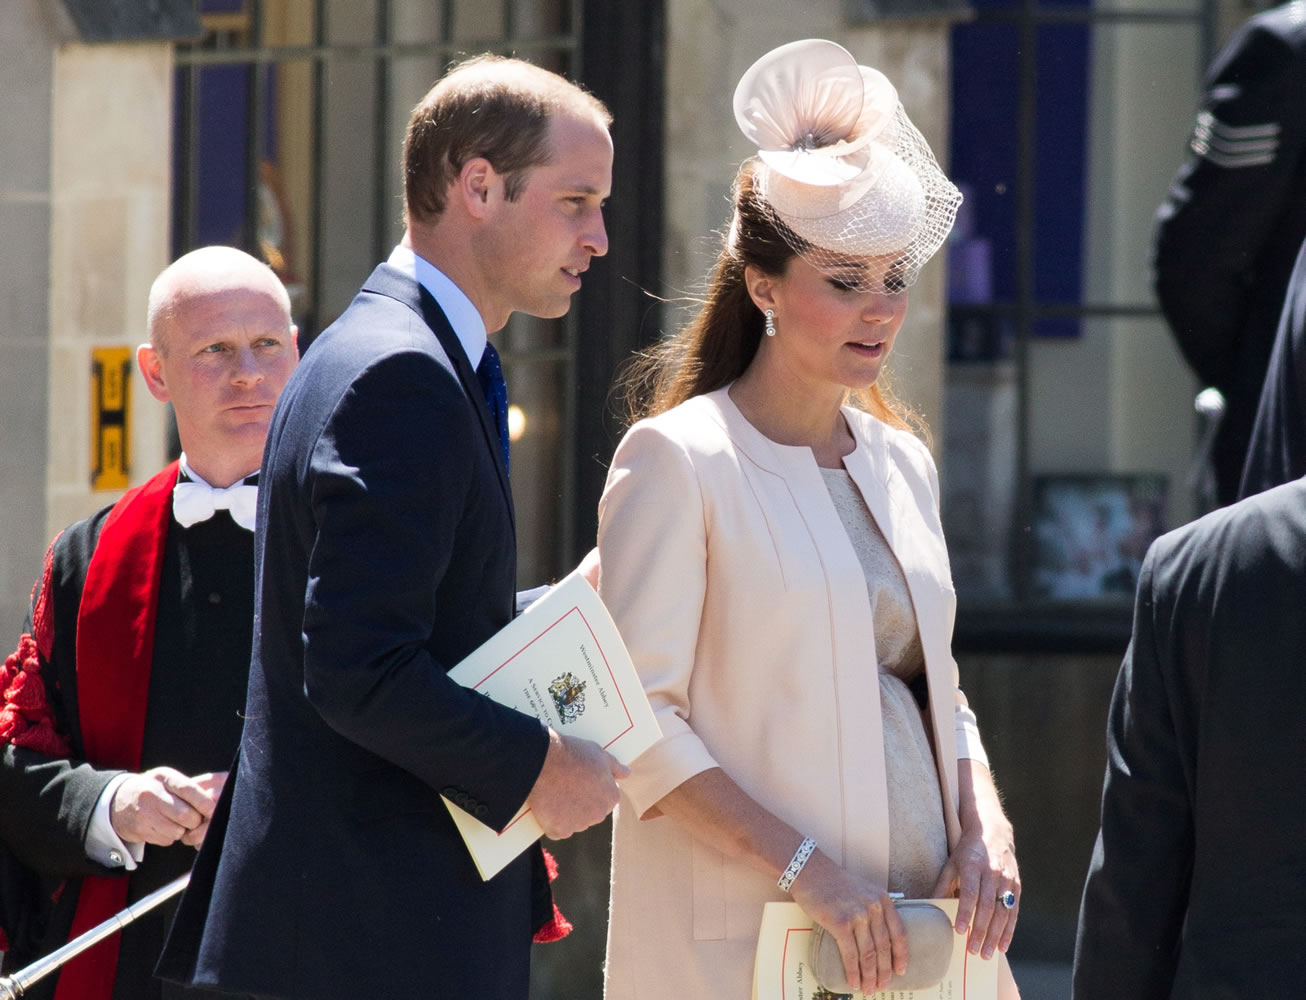 Prince William and Kate, the Duchess of Cambridge, attend a celebratory service June 4 for the 60th anniversary of the Queen's Coronation at Westminster Abbey in London.